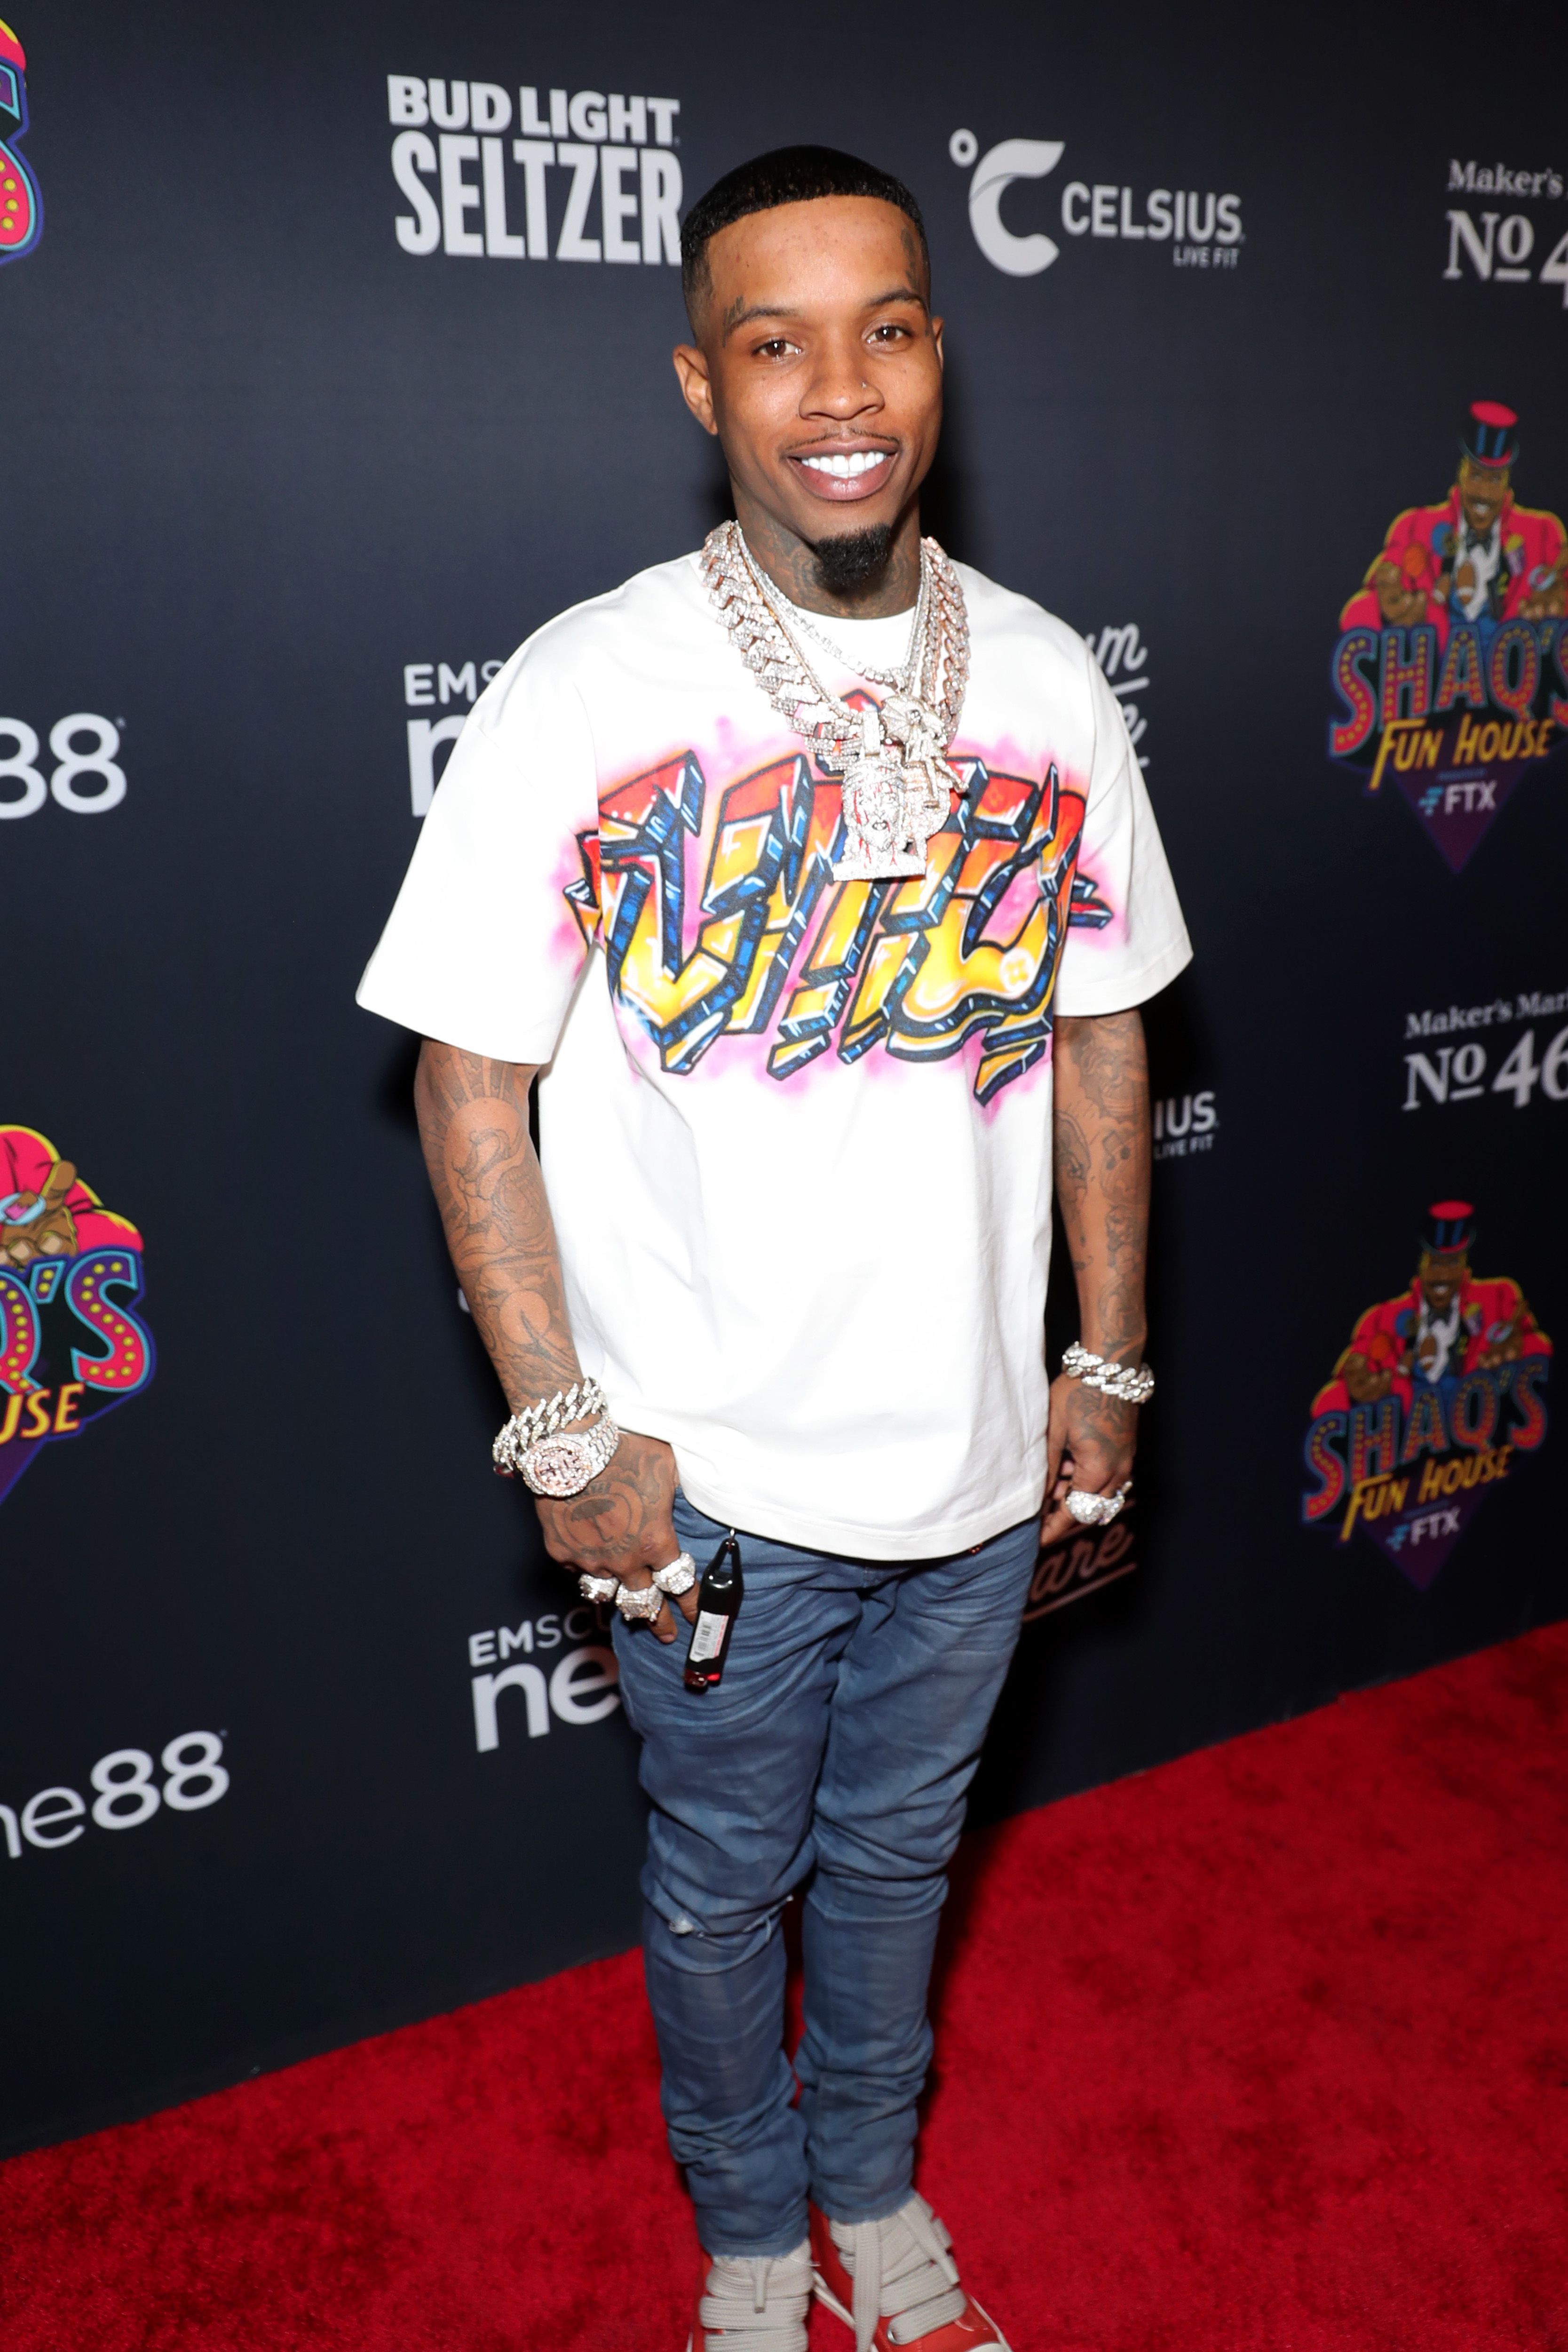 Tory Lanez on February 11, 2022, in Los Angeles, California. | Source: Getty Images